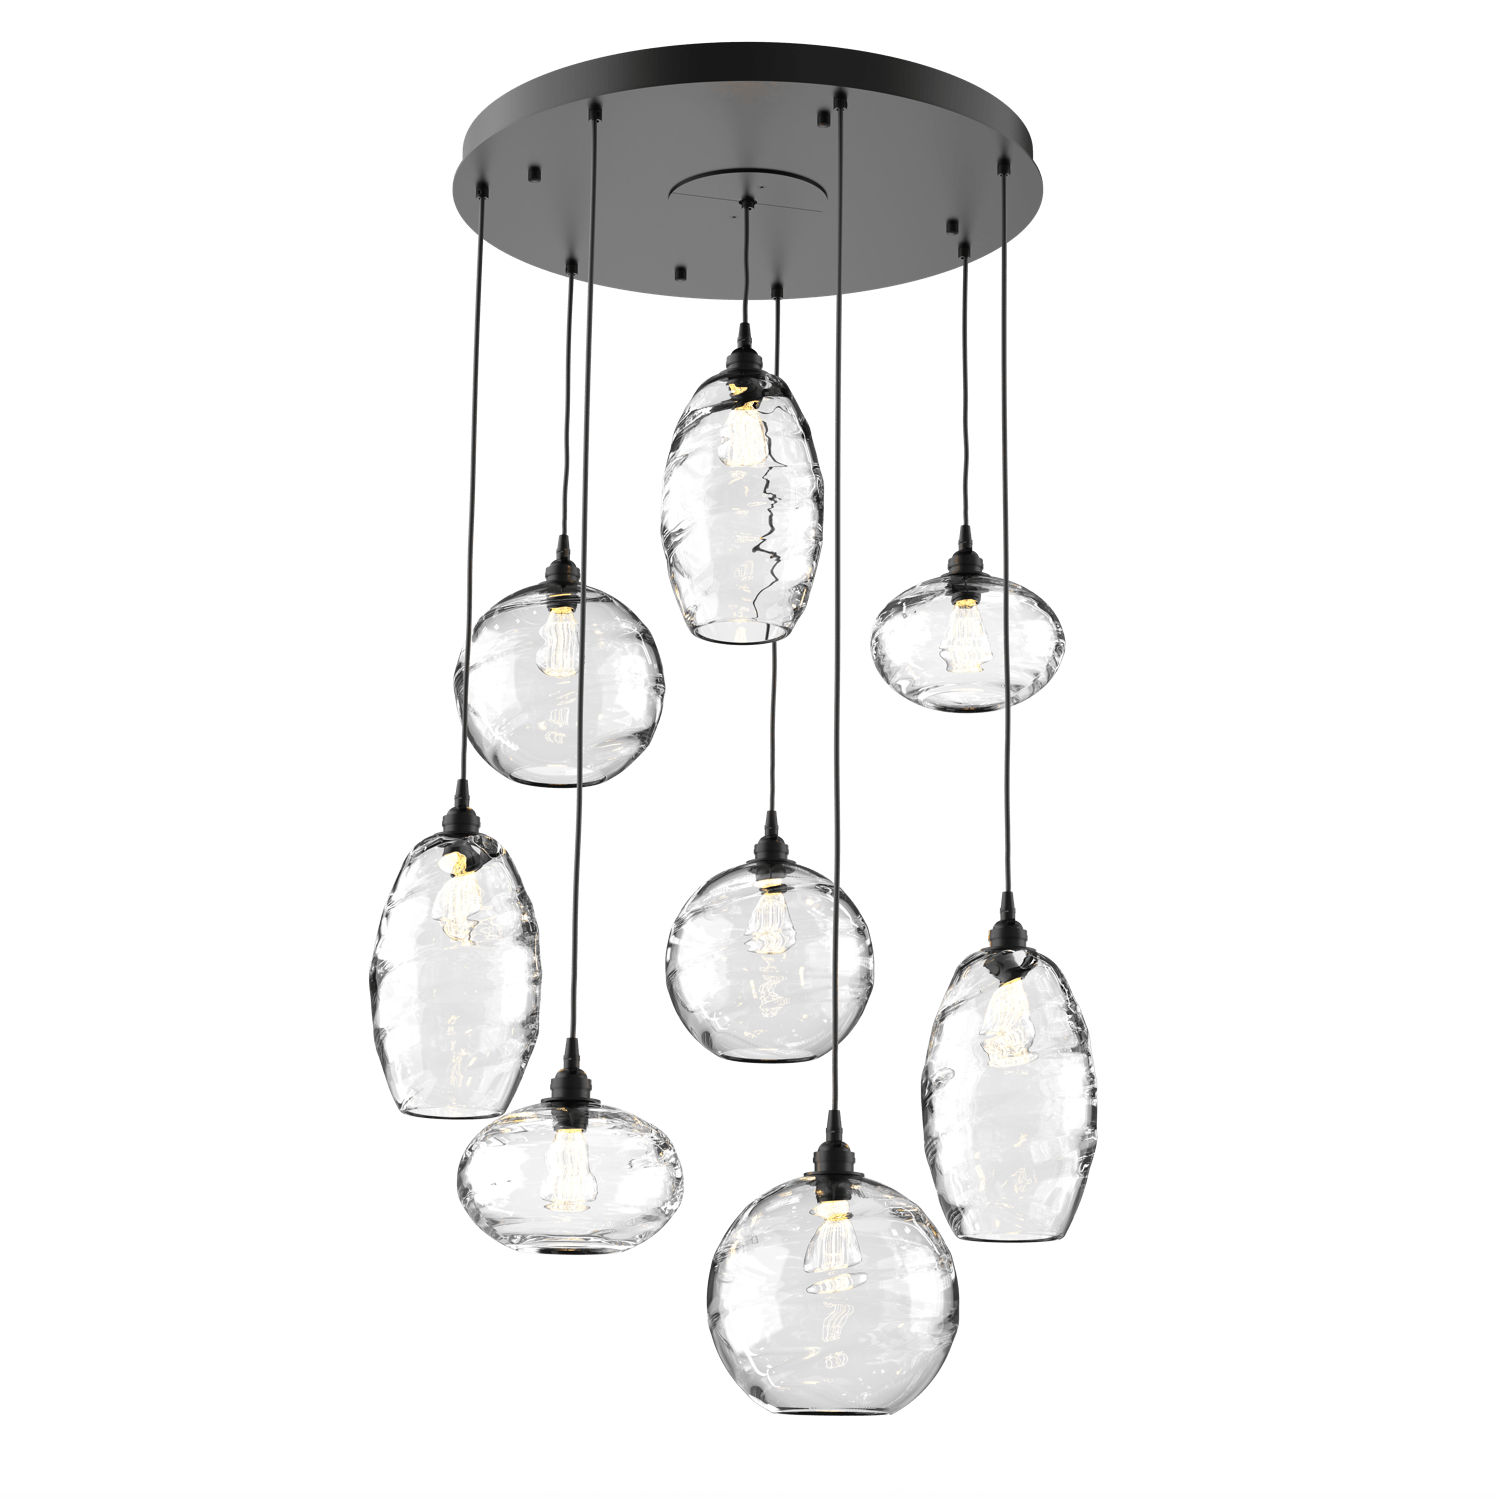 CHB0048-08-MB-OC-Hammerton-Studio-Optic-Blown-Glass-Misto-8-light-round-pendant-chandelier-with-matte-black-finish-and-optic-clear-blown-glass-shades-and-incandescent-lamping